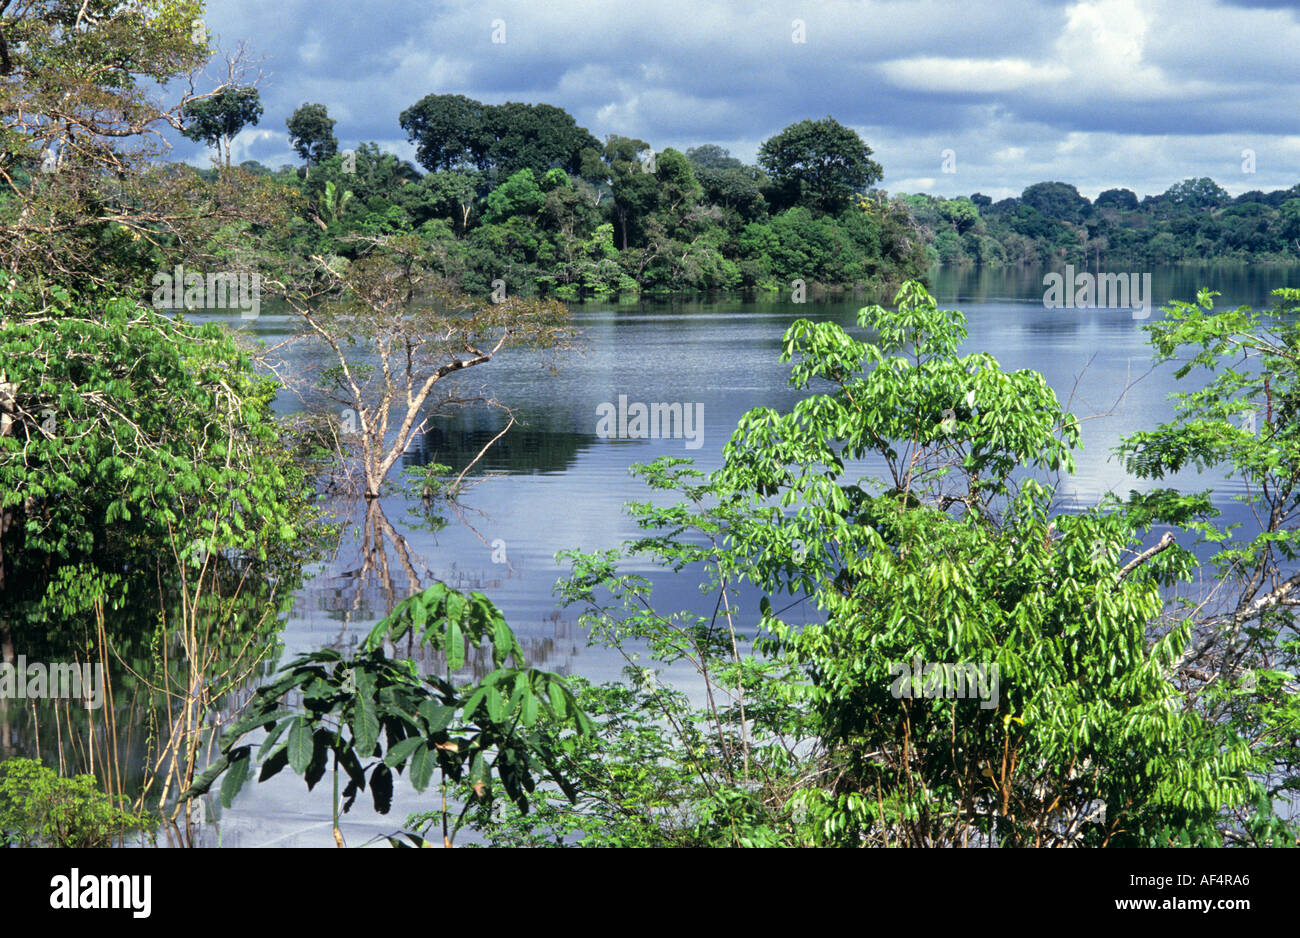 Classic river and rainforest scenery in the Amazon region of Brazil Stock Photo